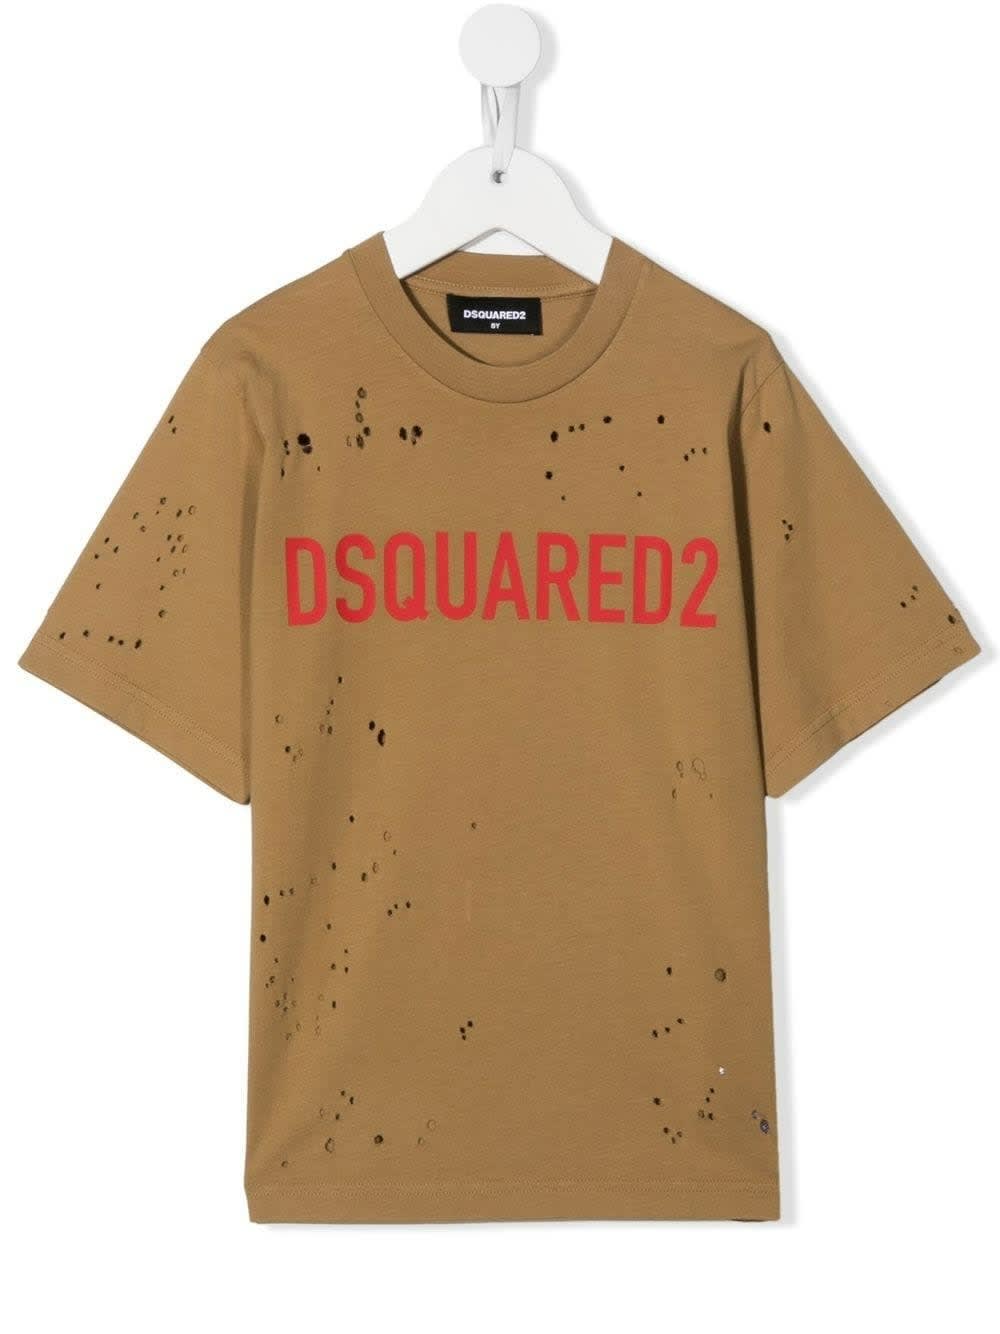 Dsquared2 Kids Camel T-shirt With Ruined Effect And Contrast Logo